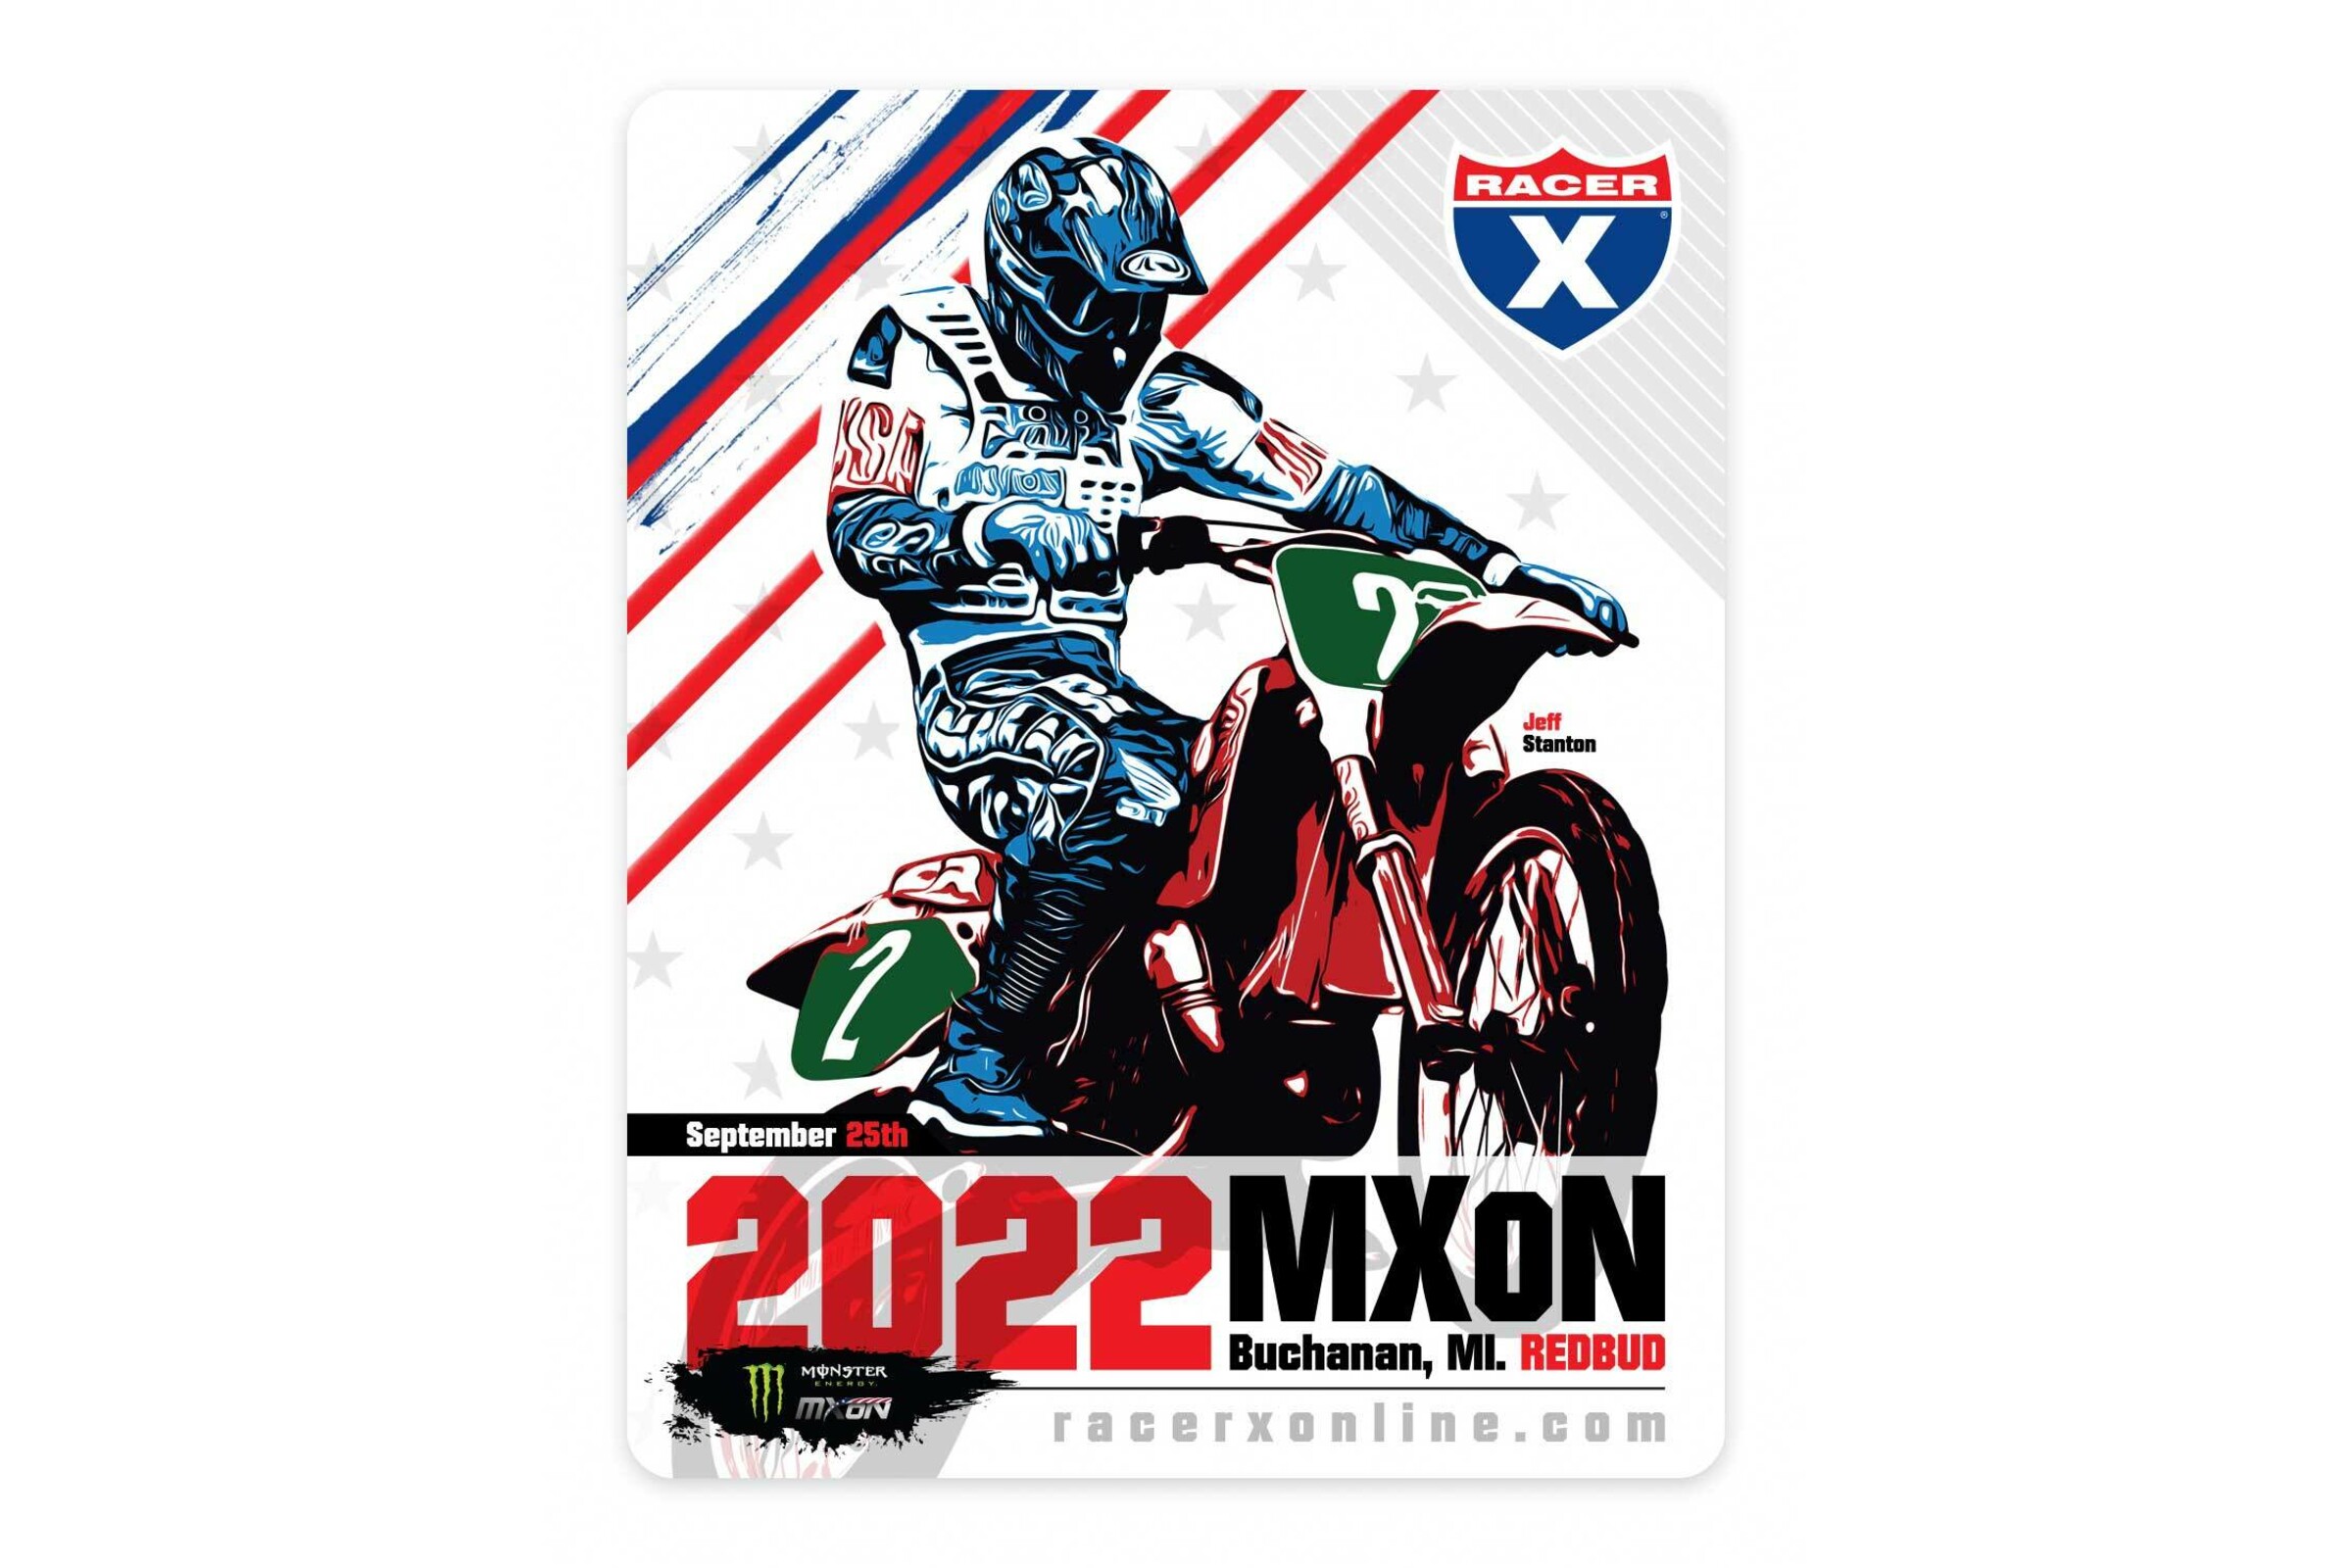 Get Your Free 2022 Motocross of Nations Jeff Stanton Event Sticker This Weekend